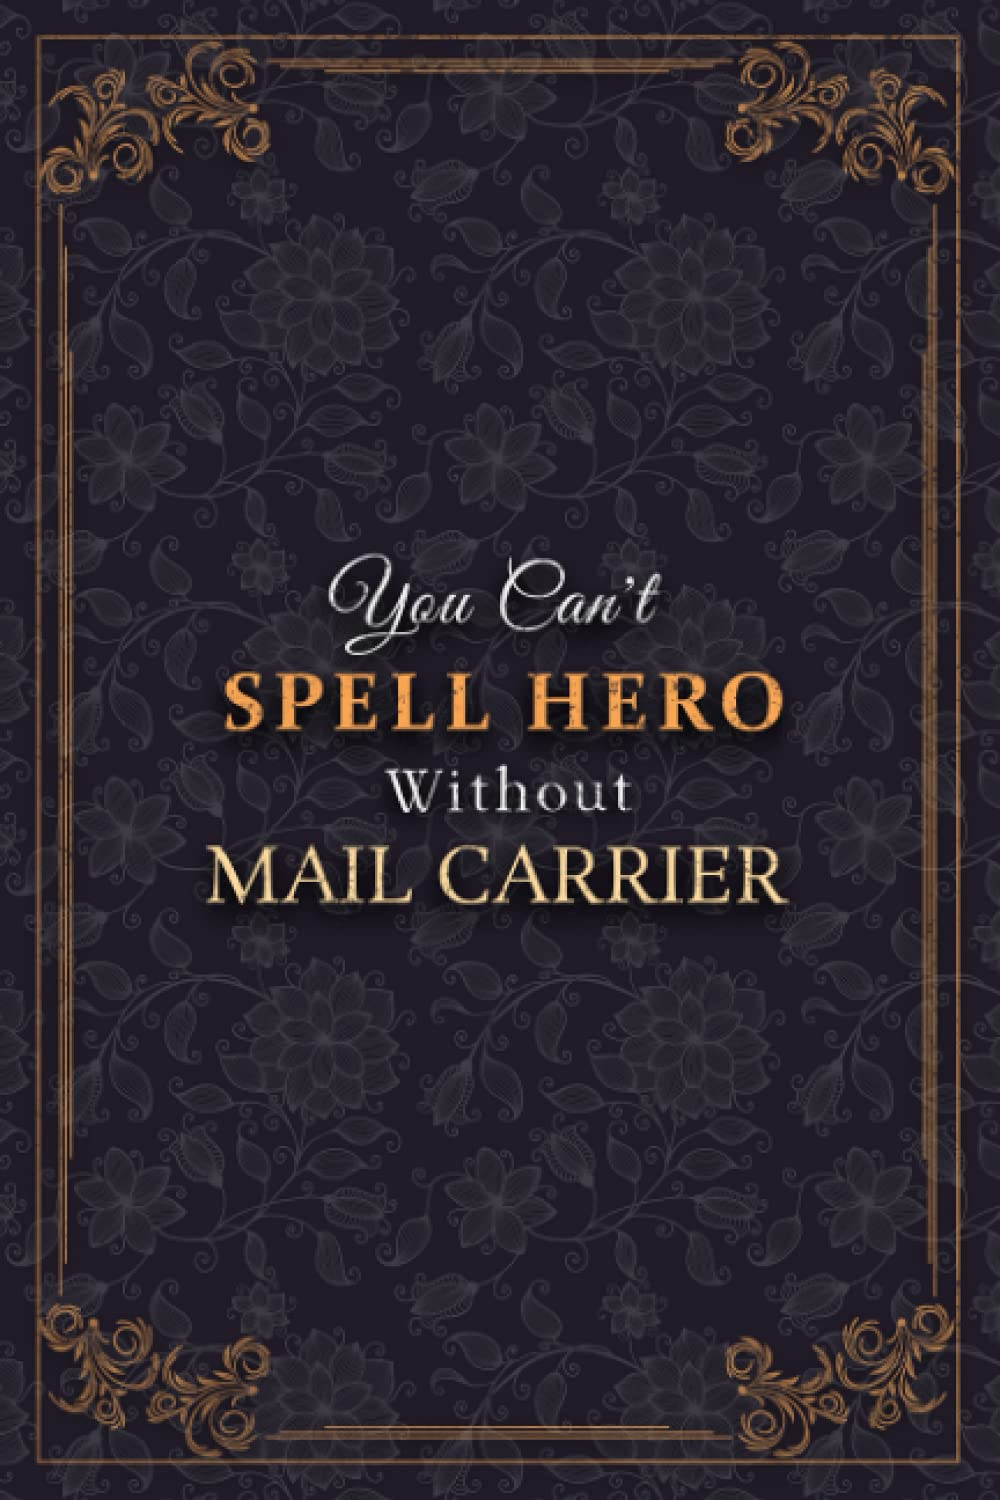 Mail Carrier Notebook Planner - You Can't Spell Hero Without Mail Carrier Job Title Working Cover Journal: Business, Tax, 5.24 x 22.86 cm, A5, Weekly, To Do List, 120 Pages, Monthly, Meal, 6x9 inch